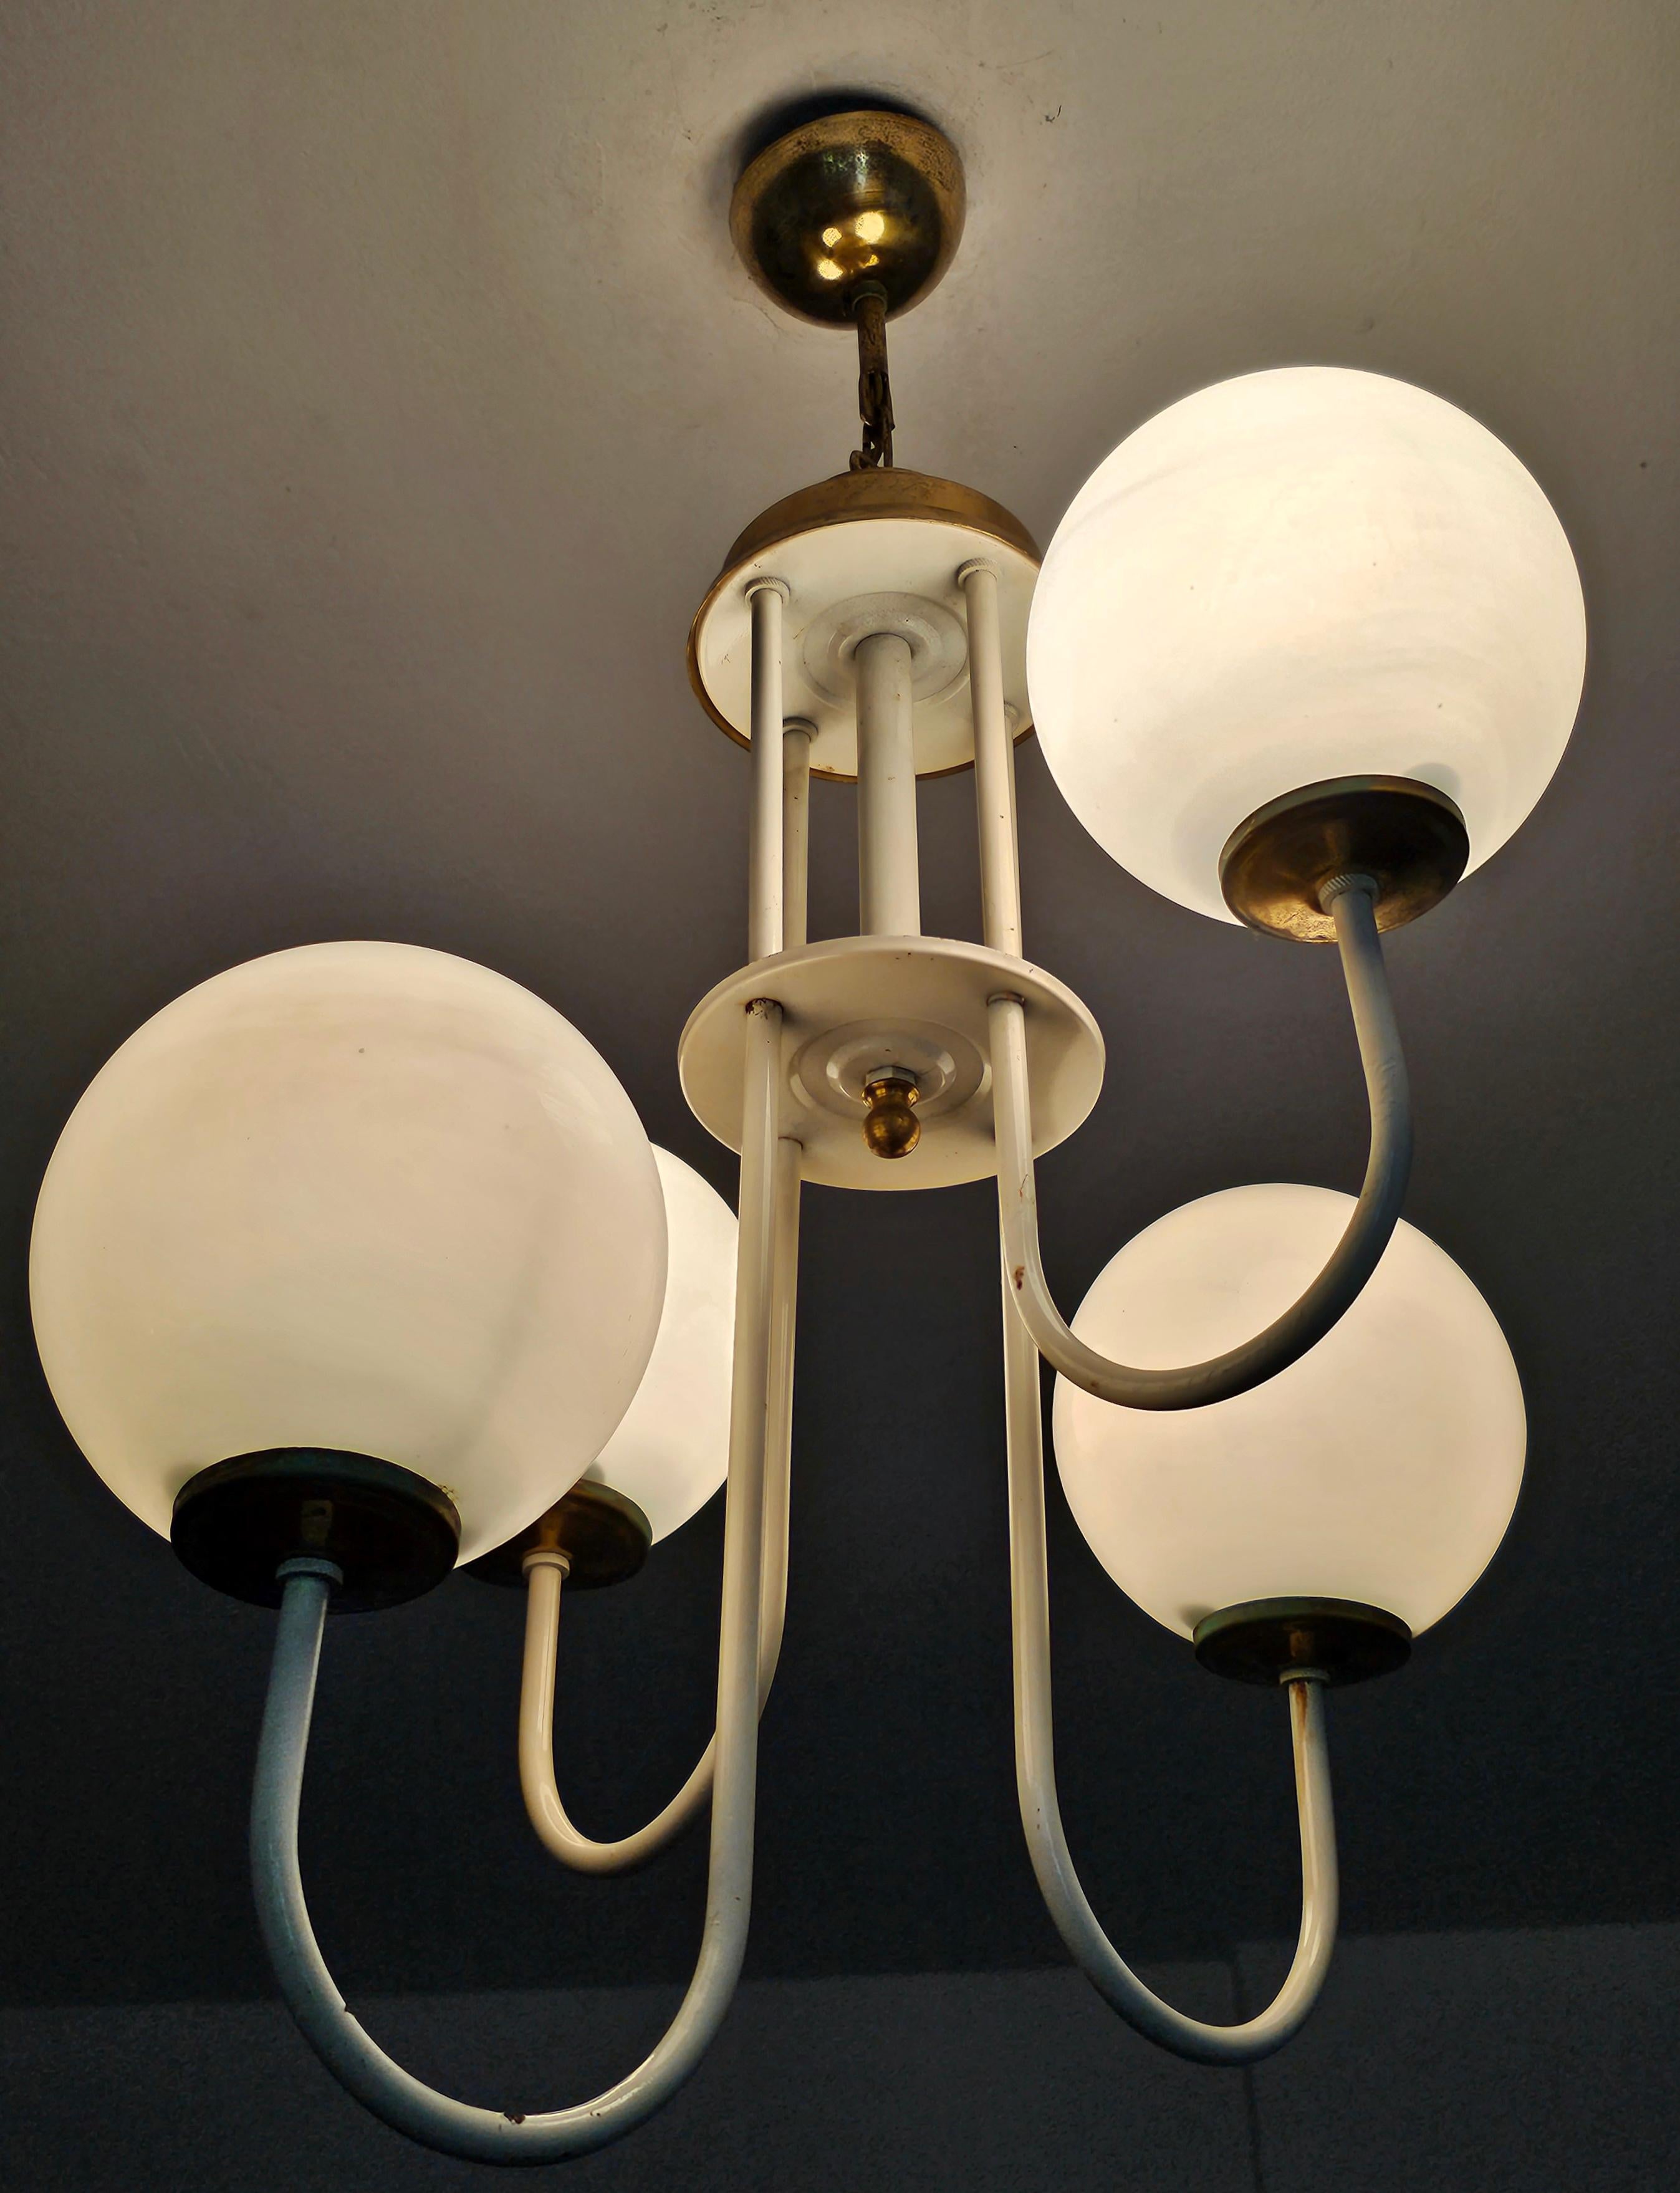 Rare Mid Century Modern Chandelier with Opaline Glass Balls, Italy 1960s For Sale 4